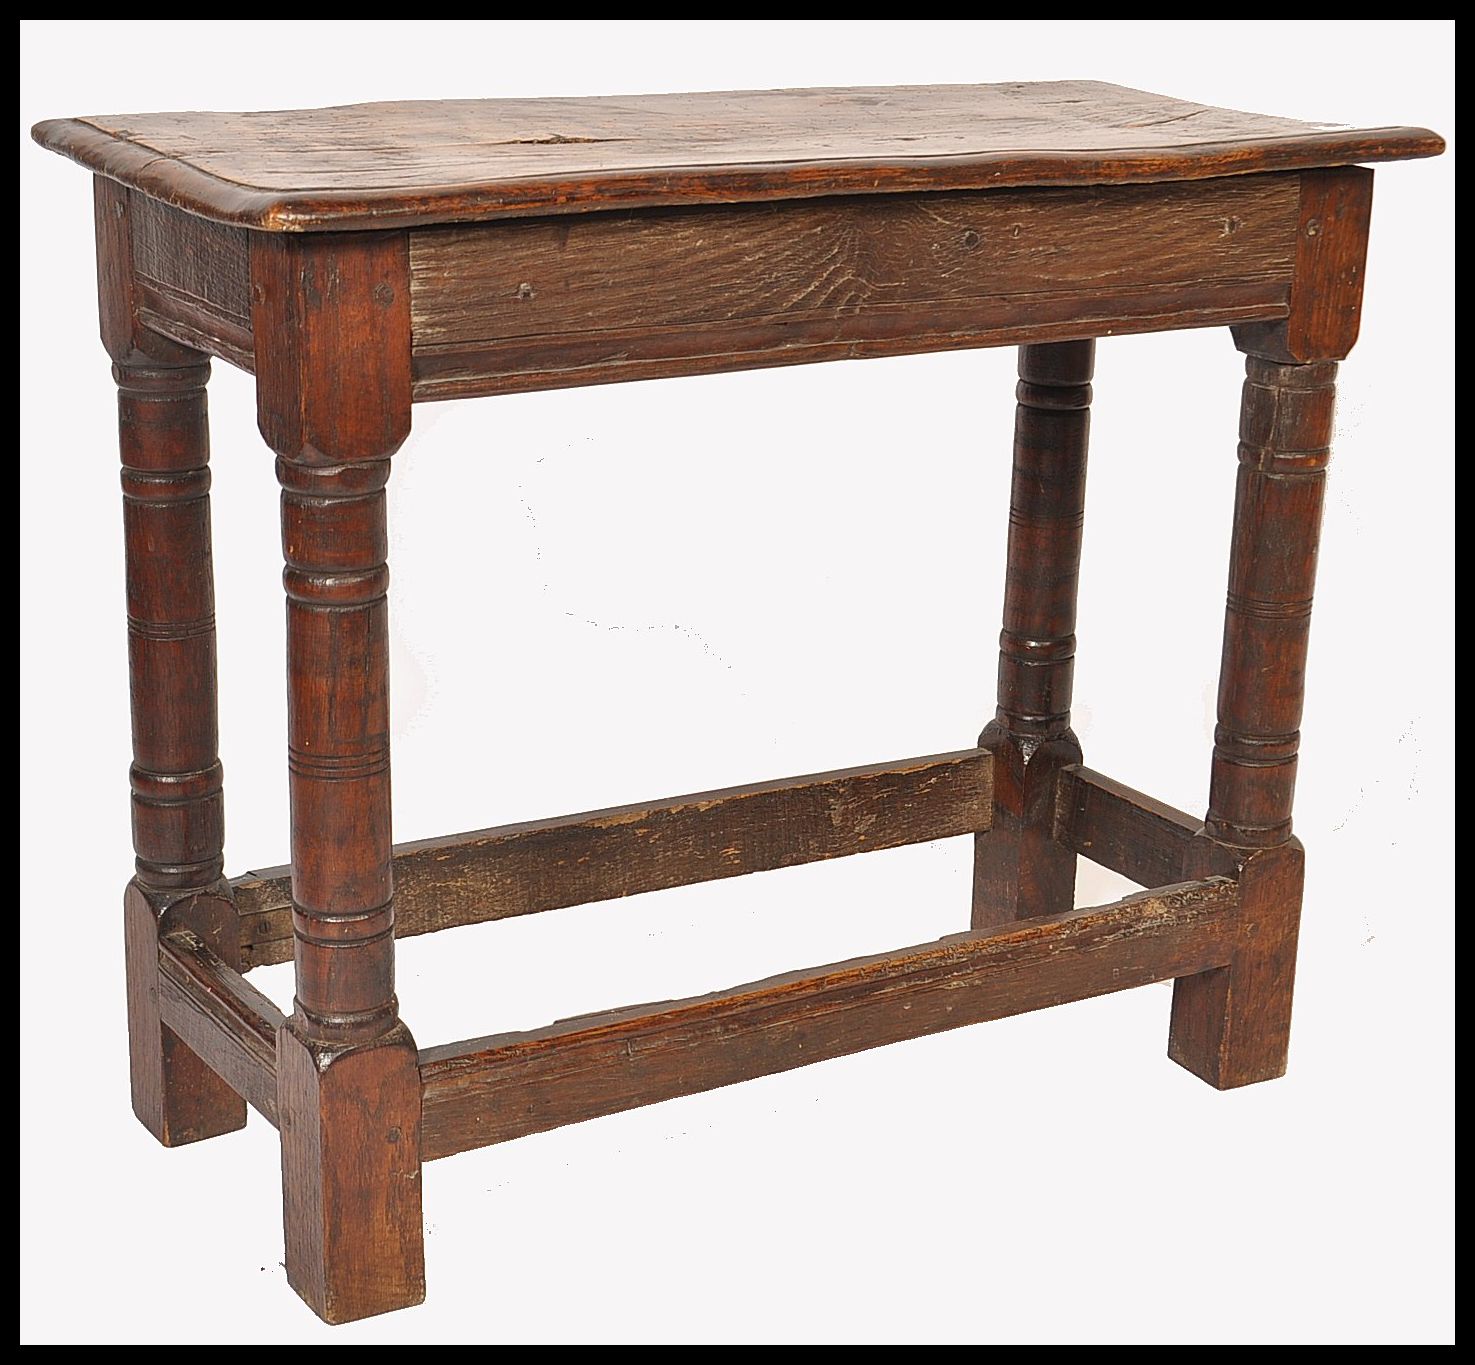 A 17th / 18th century country elm and oak joint stool. Unusual larger size with planked top over